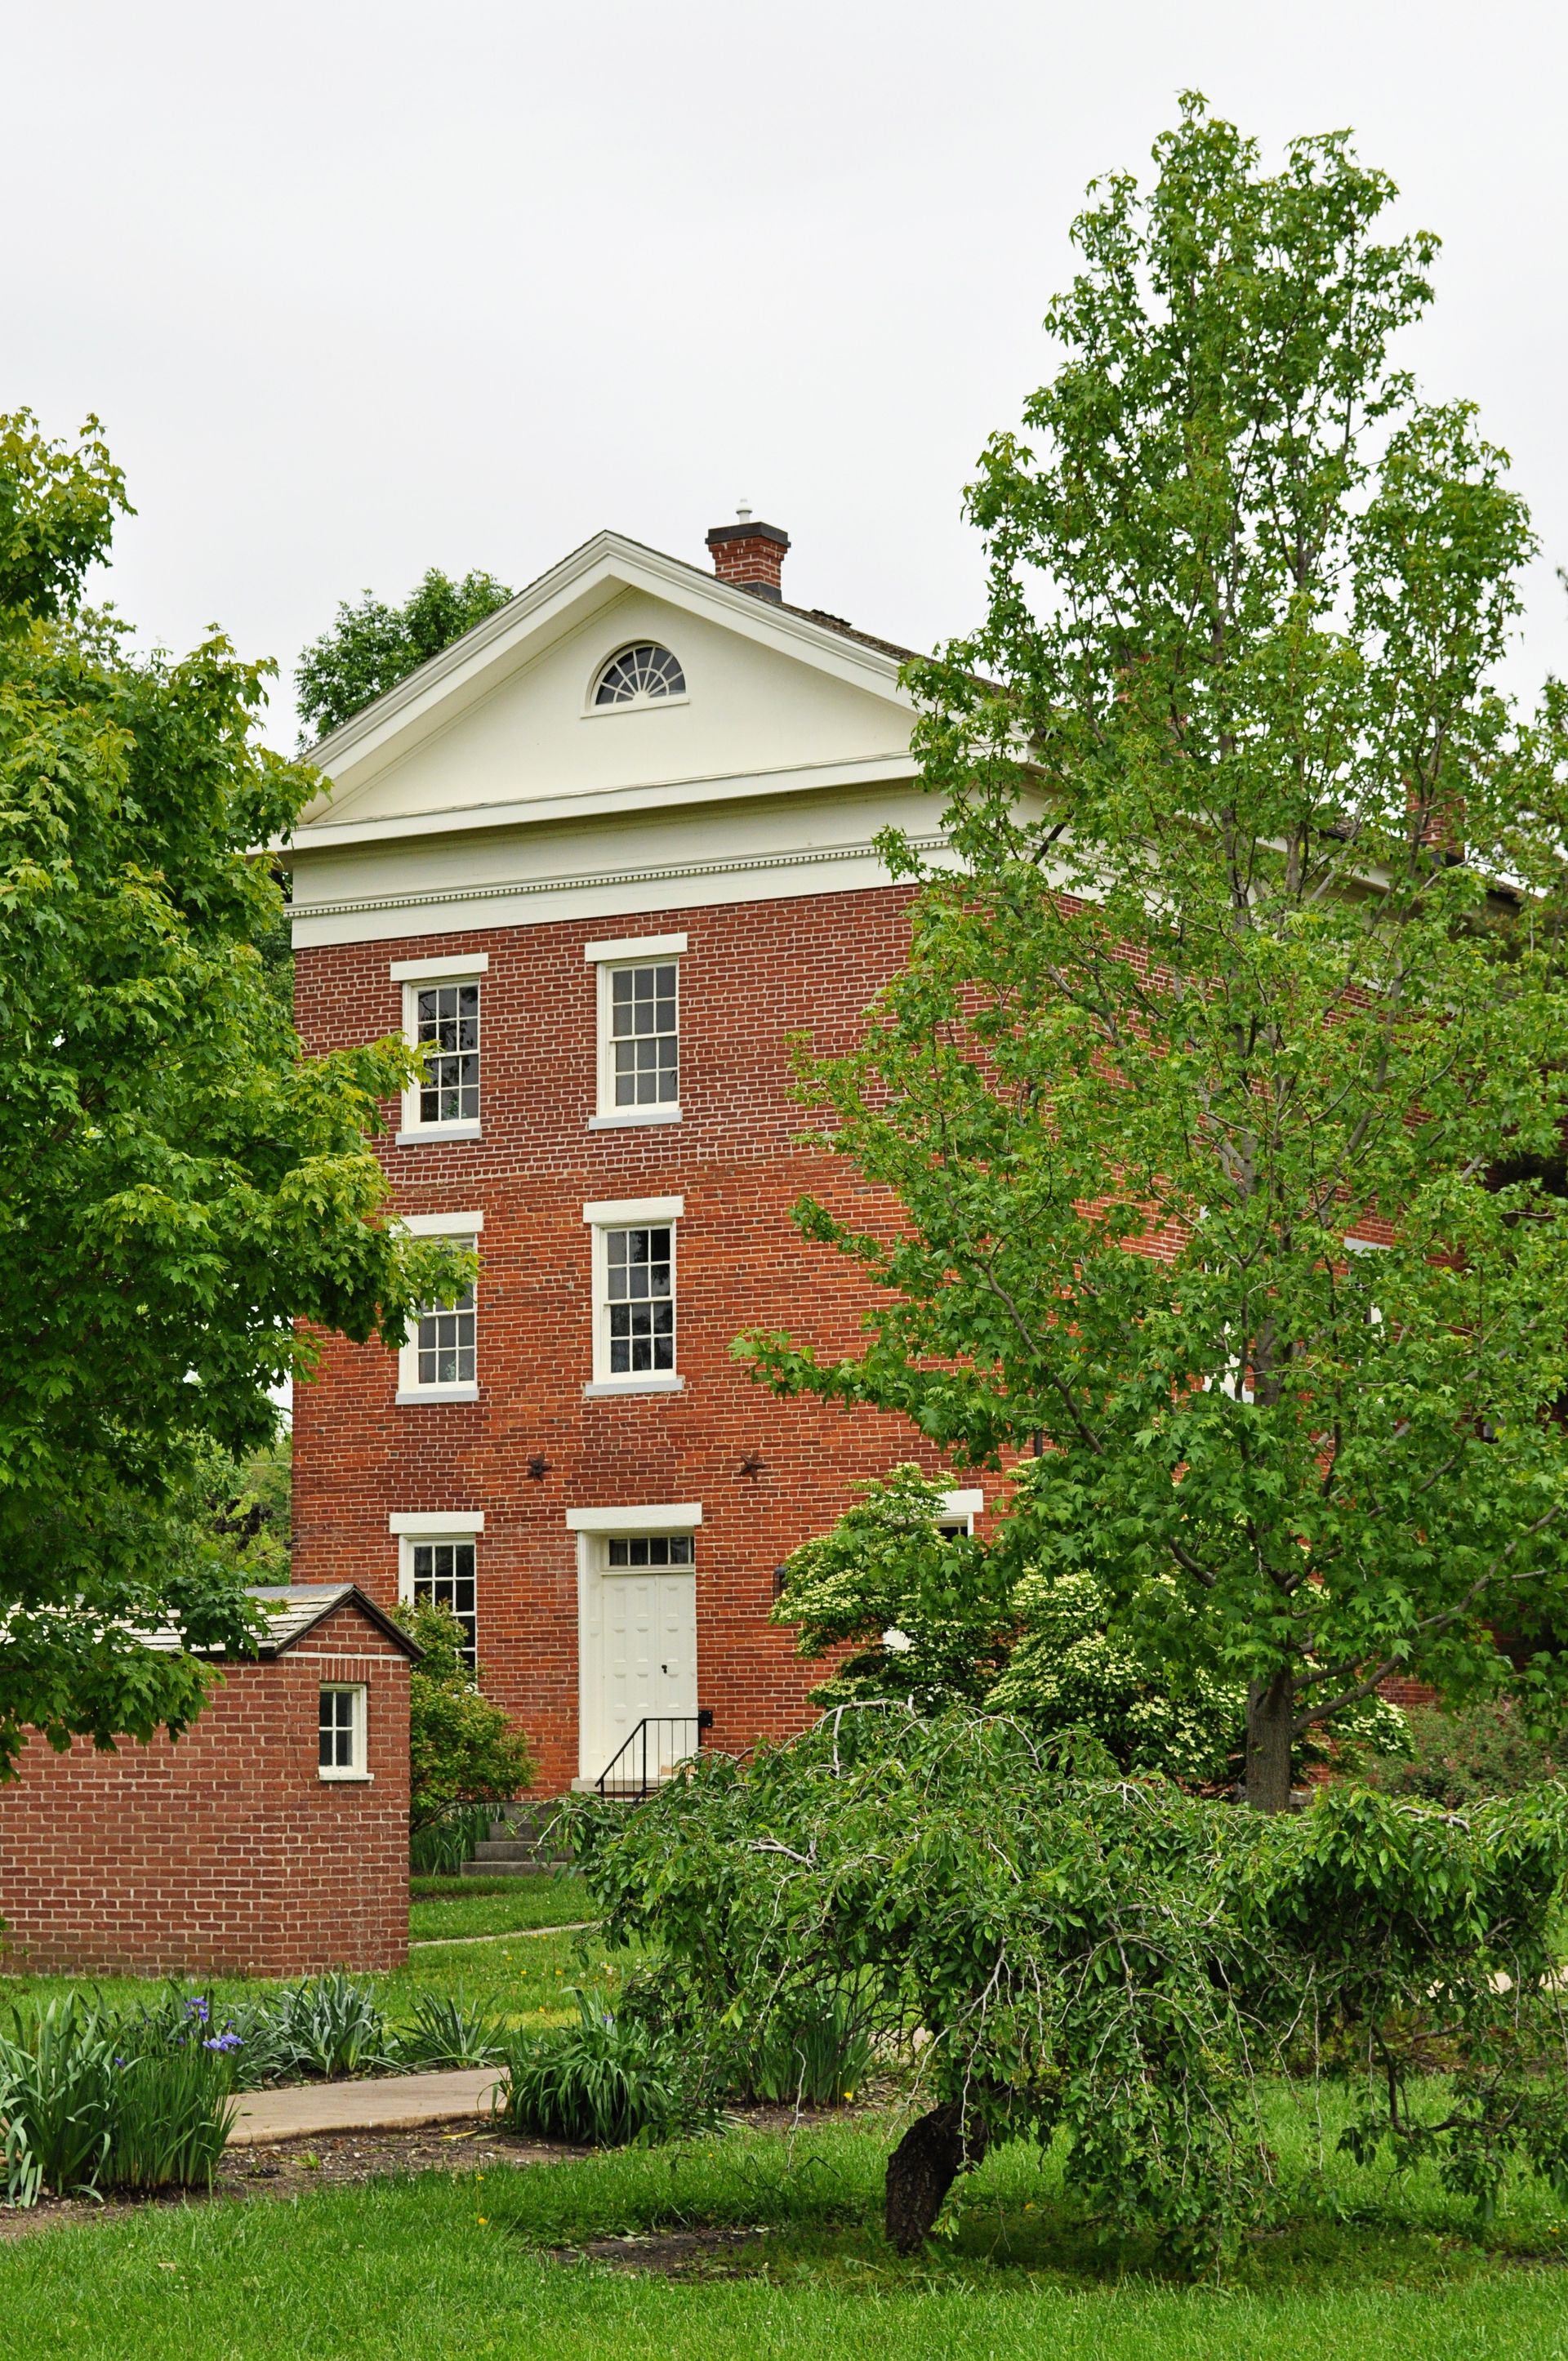 An image of the Cultural Hall in Nauvoo, Illinois.